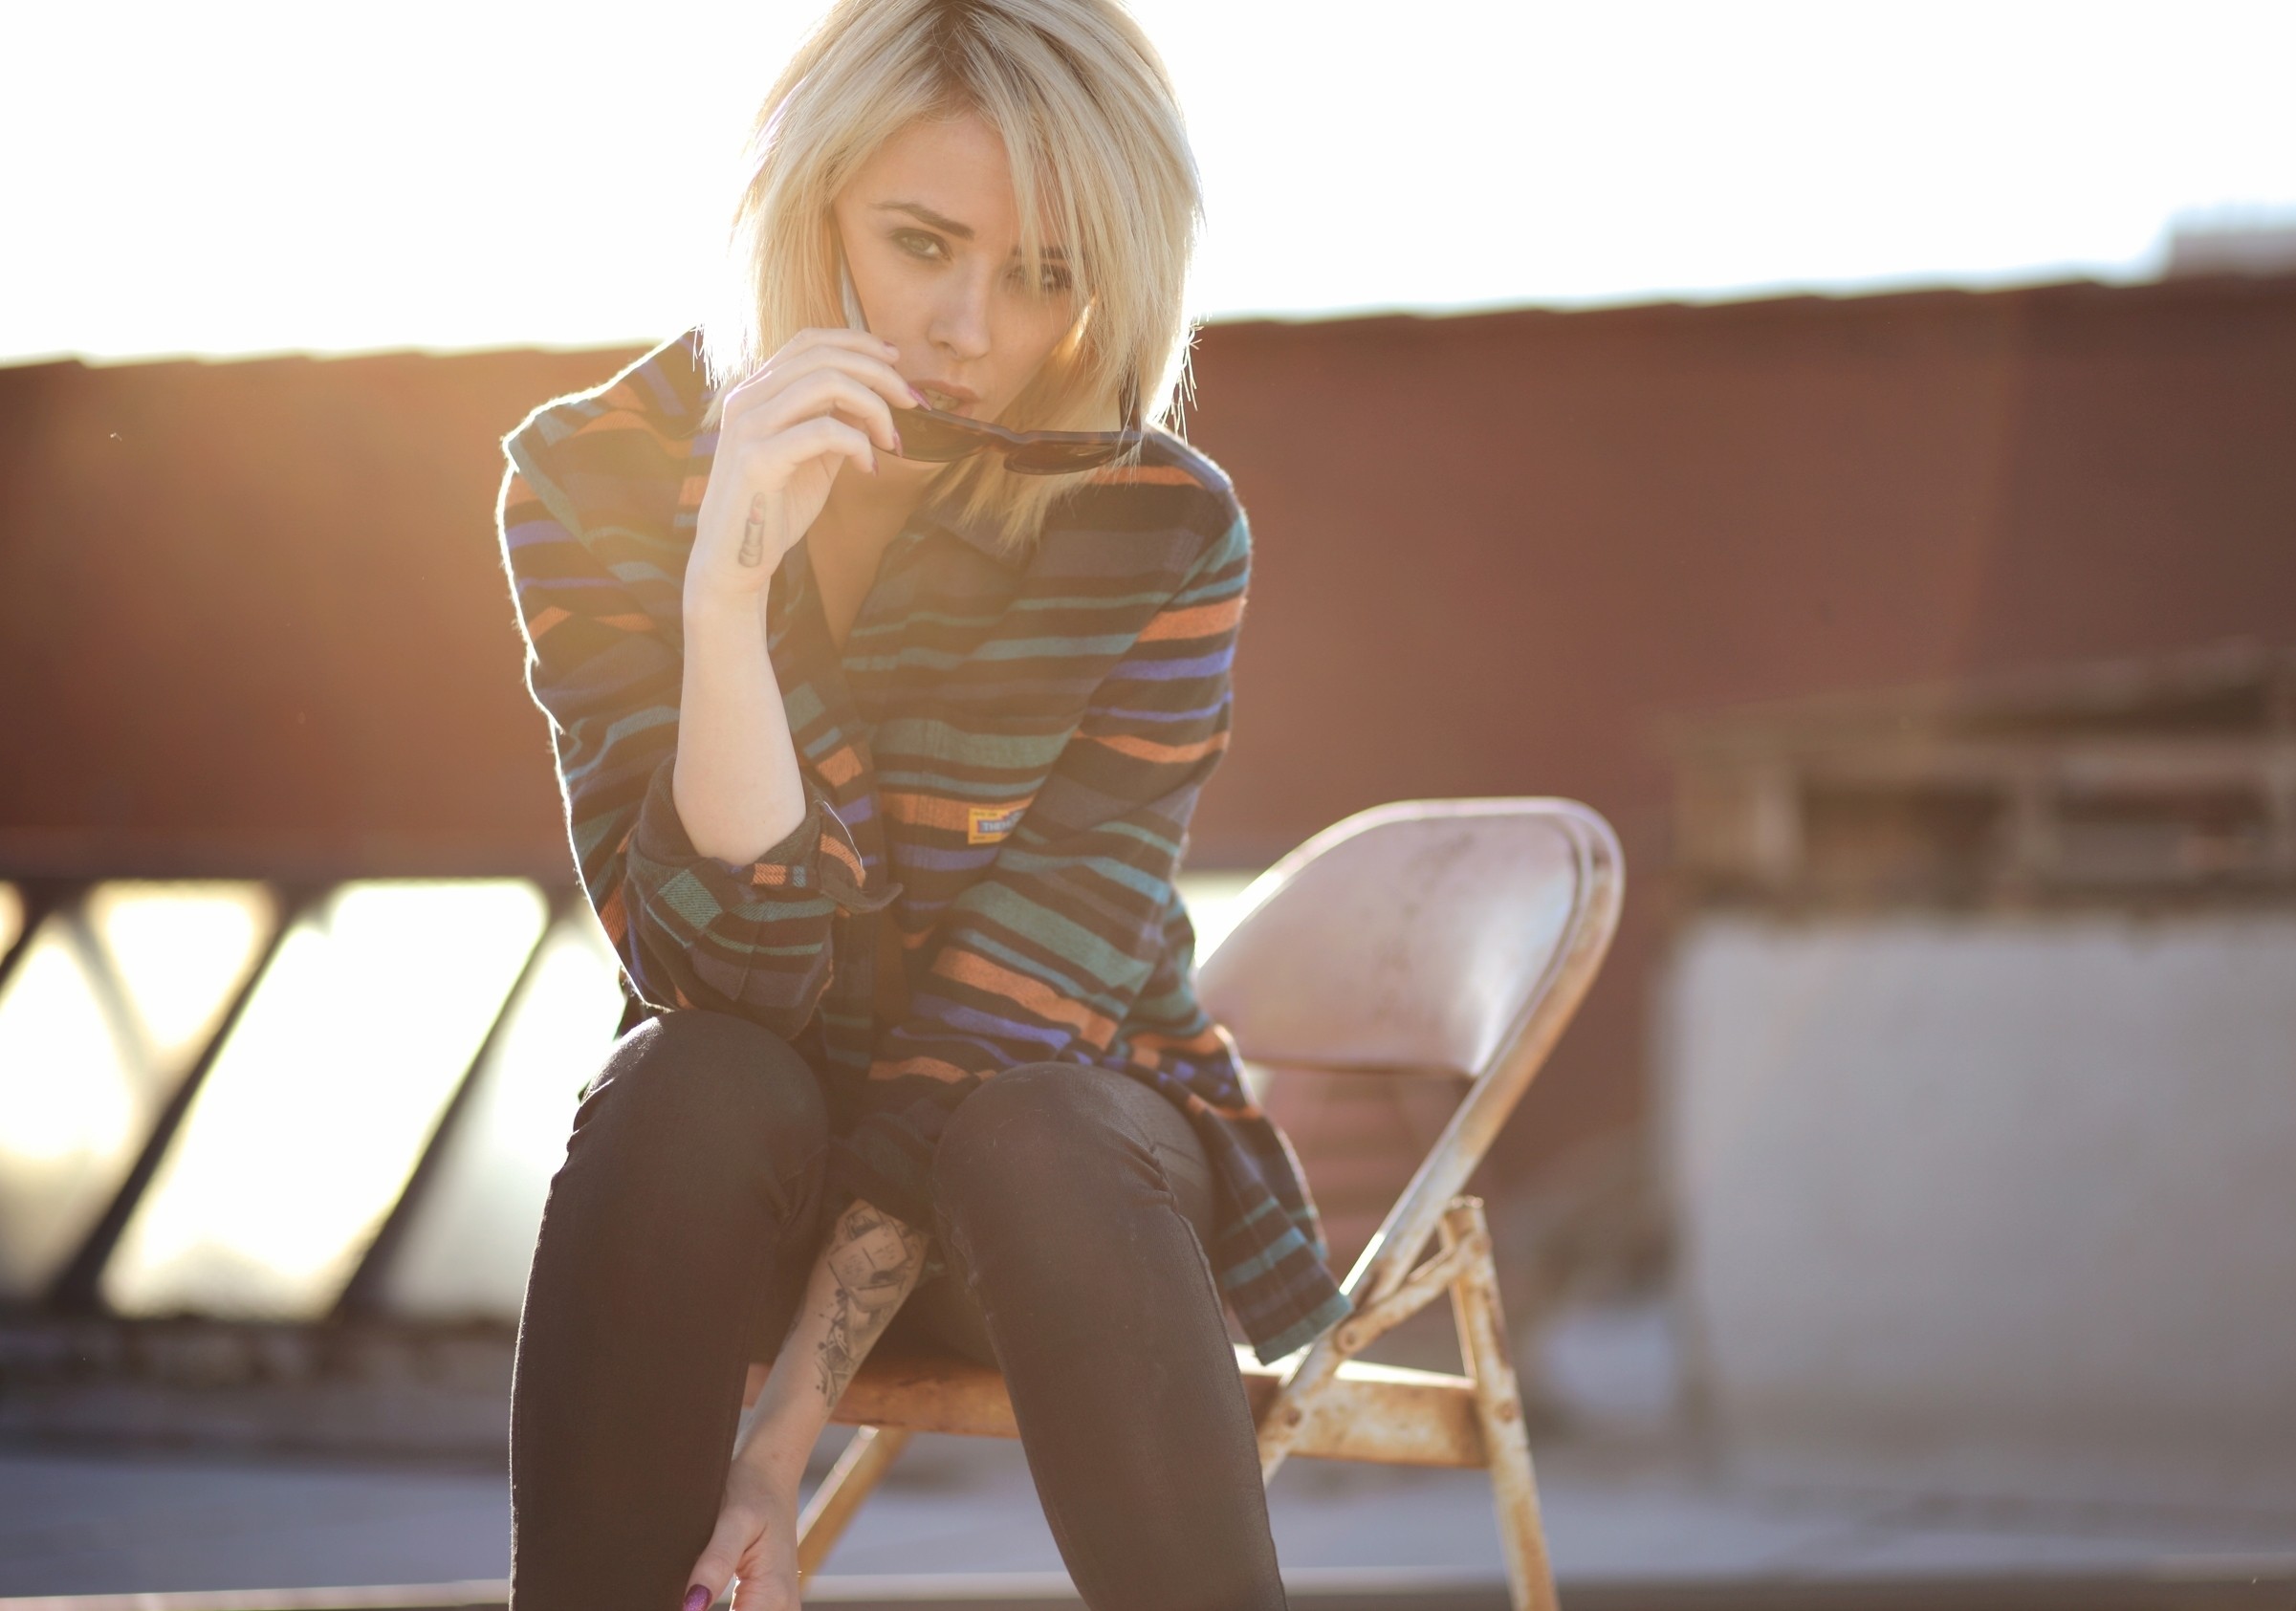 People 2401x1685 women women with glasses Alysha Nett women with shades sunglasses dyed hair women outdoors chair looking at viewer striped clothing overexposed